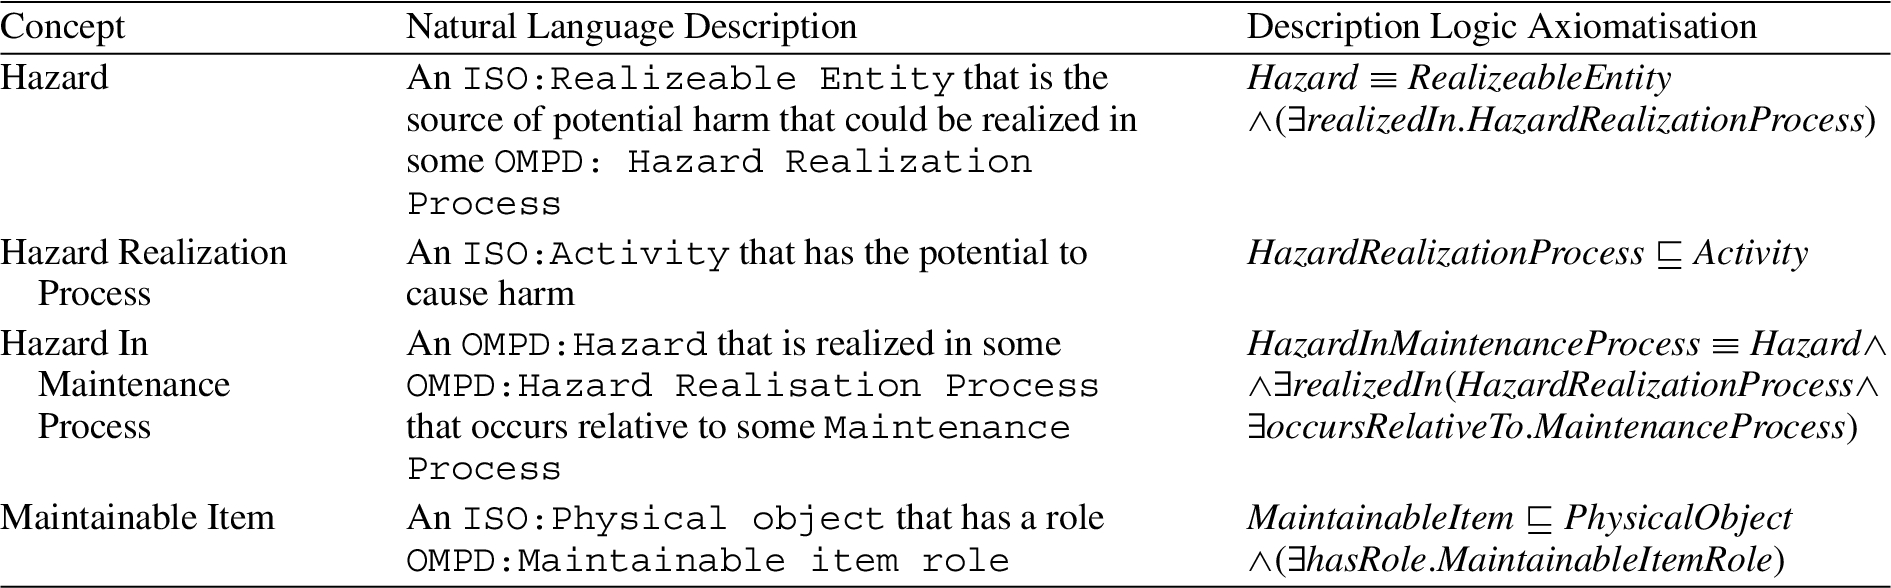 Definitions for Hazard and Maintainable Item in OMPD